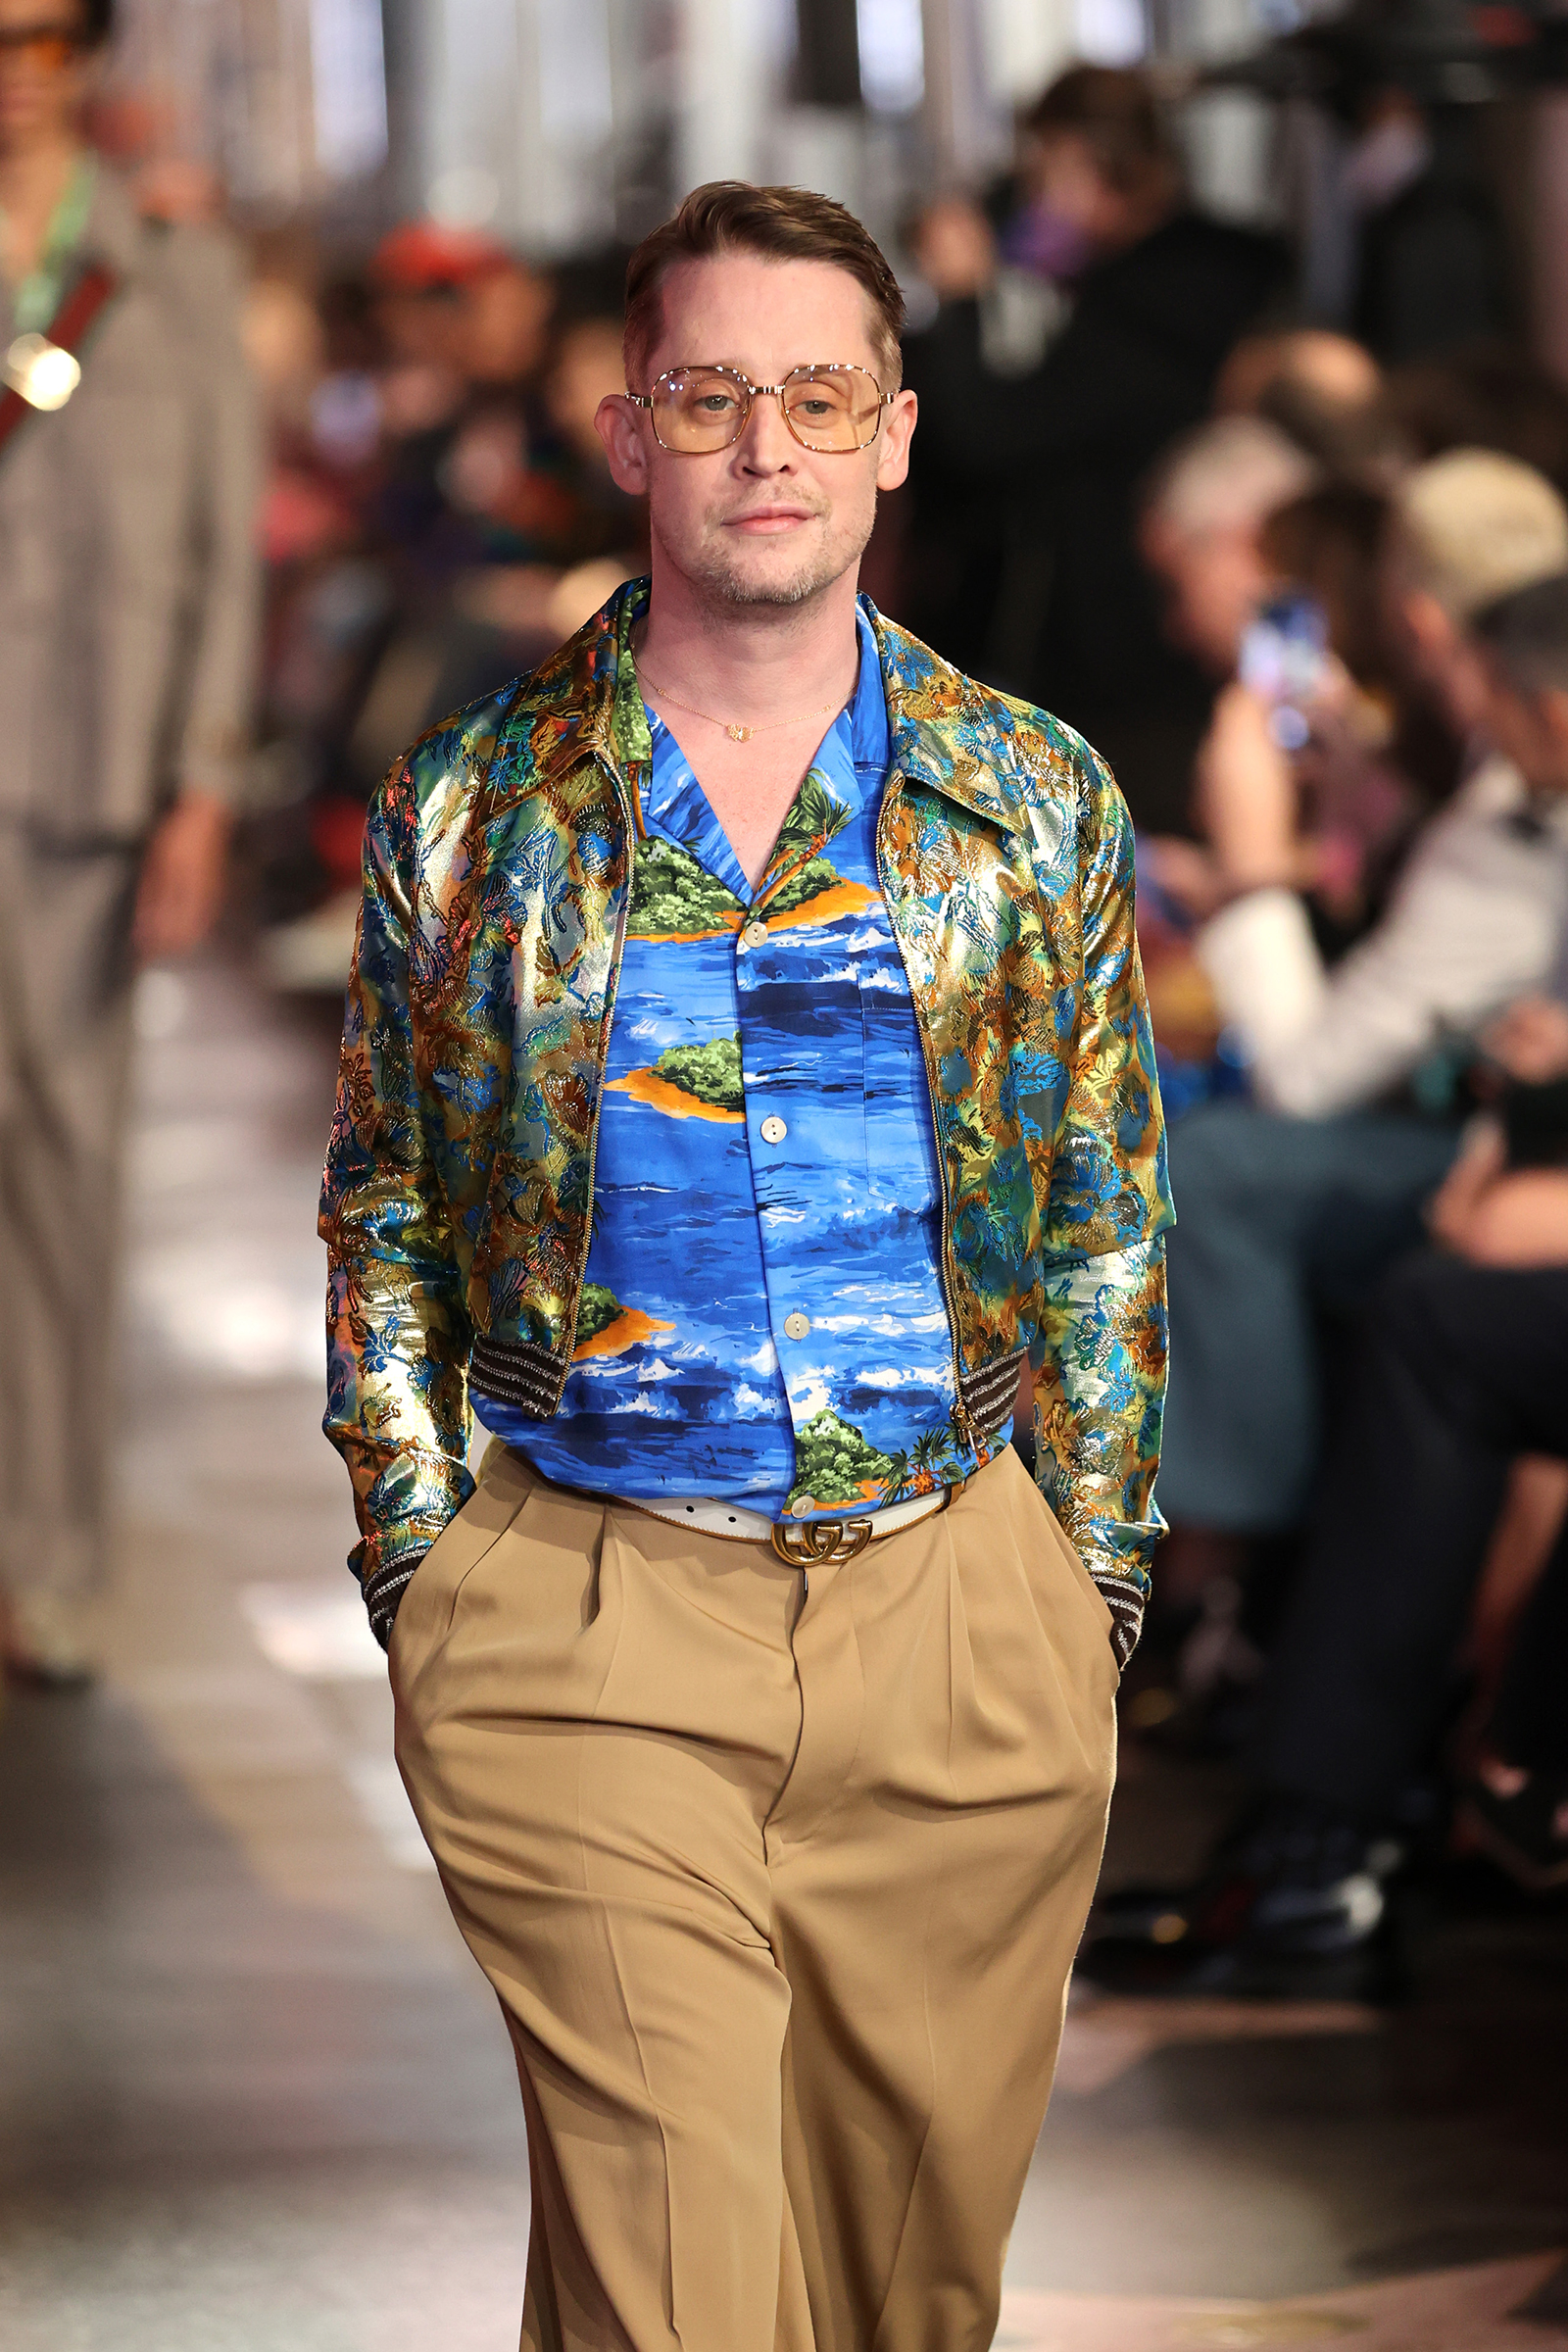 vergeven de jouwe Doe een poging Macaulay Culkin and Jared Leto join celebrity models at Gucci Love Parade  show - CNN Style